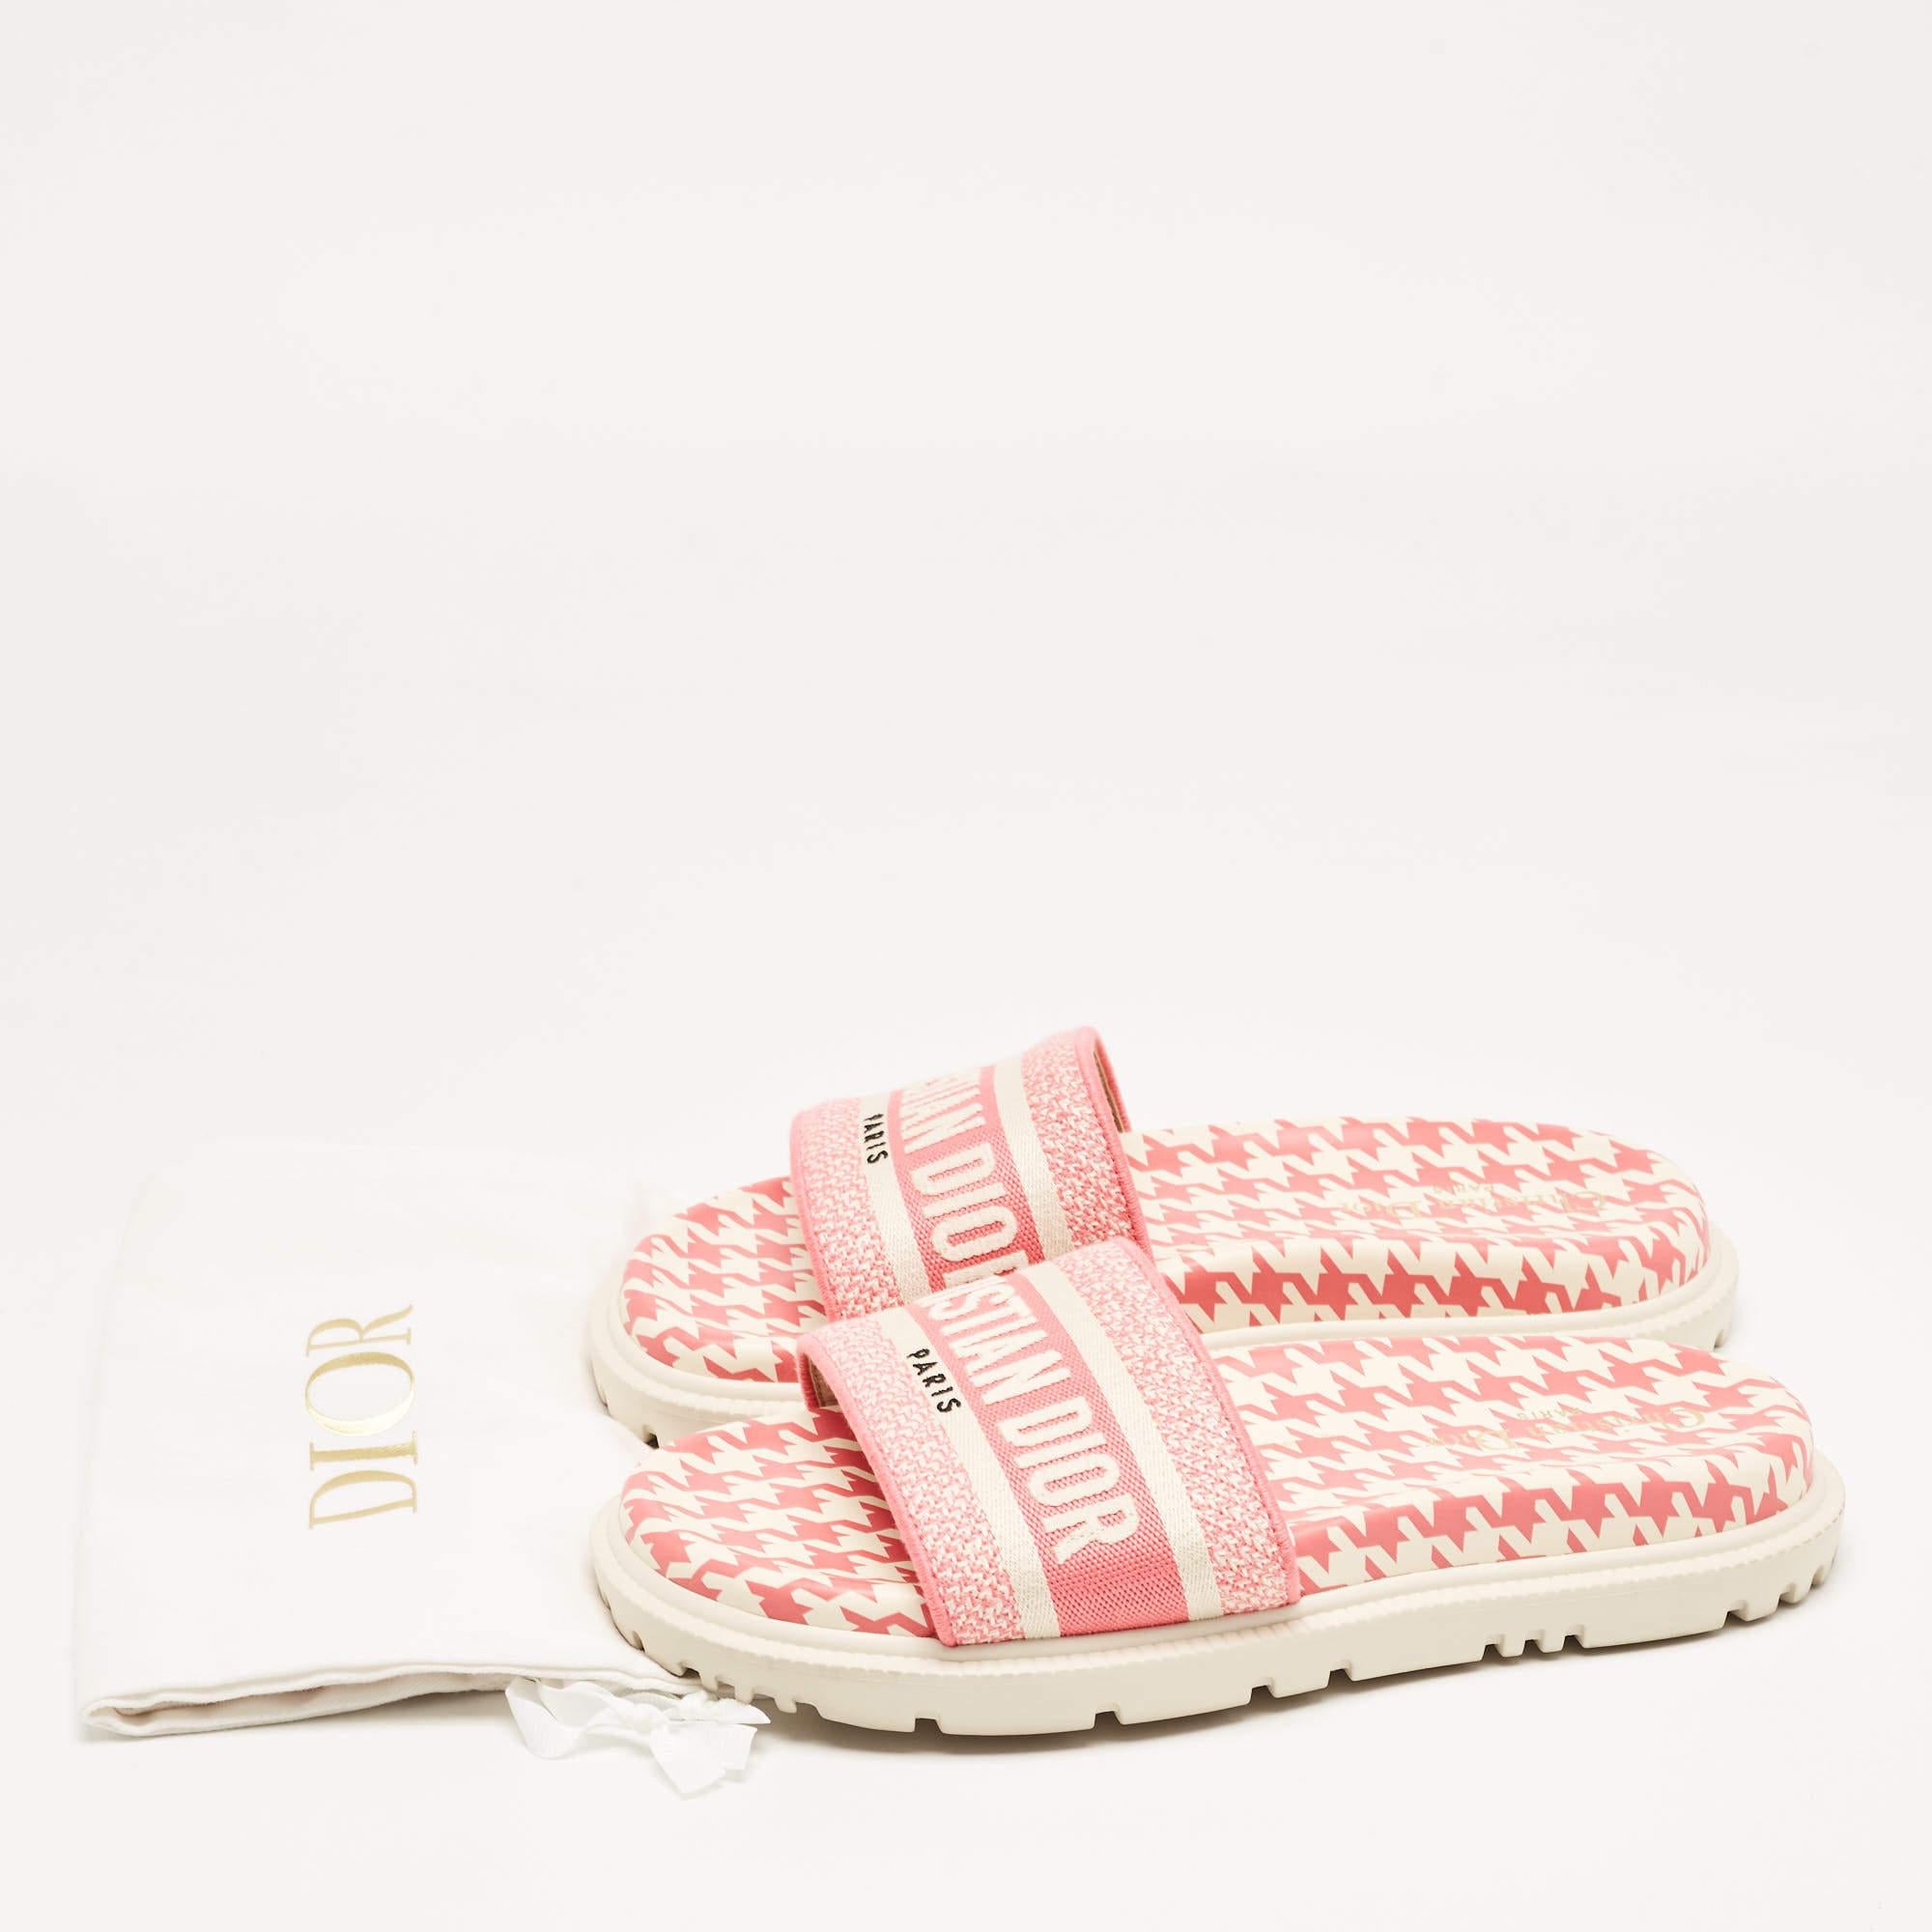 Dior Pink/White Logo Embroidered Canvas Houndstooth Dway Slides Size 38 5